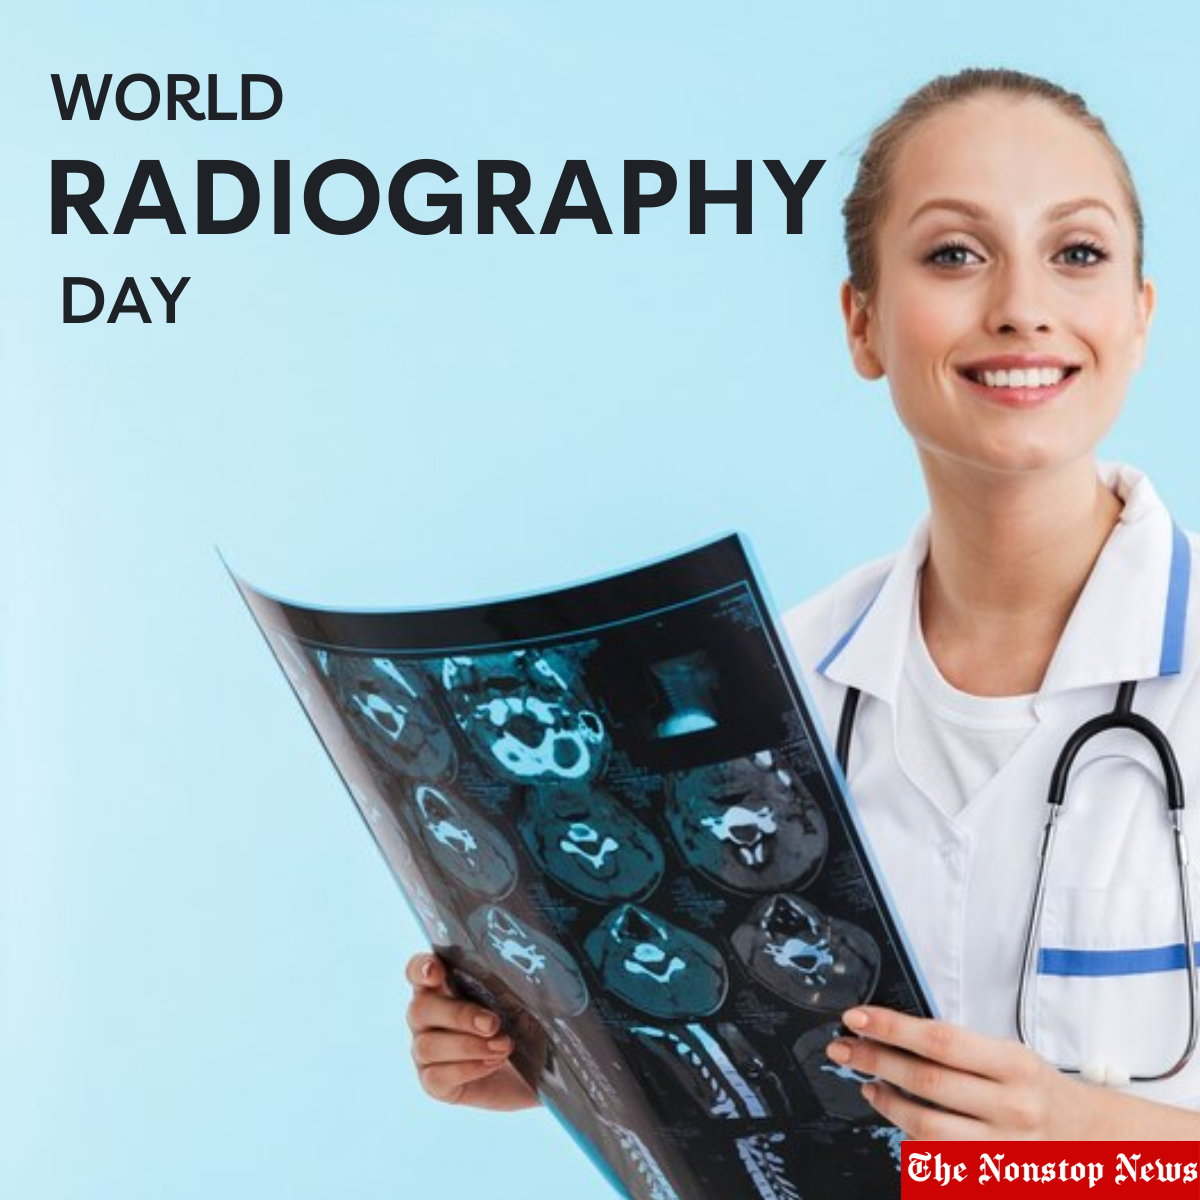 World Radiography Day 2022 Current Theme, Wishes, Quotes, Images, Posters, Greetings, Messages, and Slogans